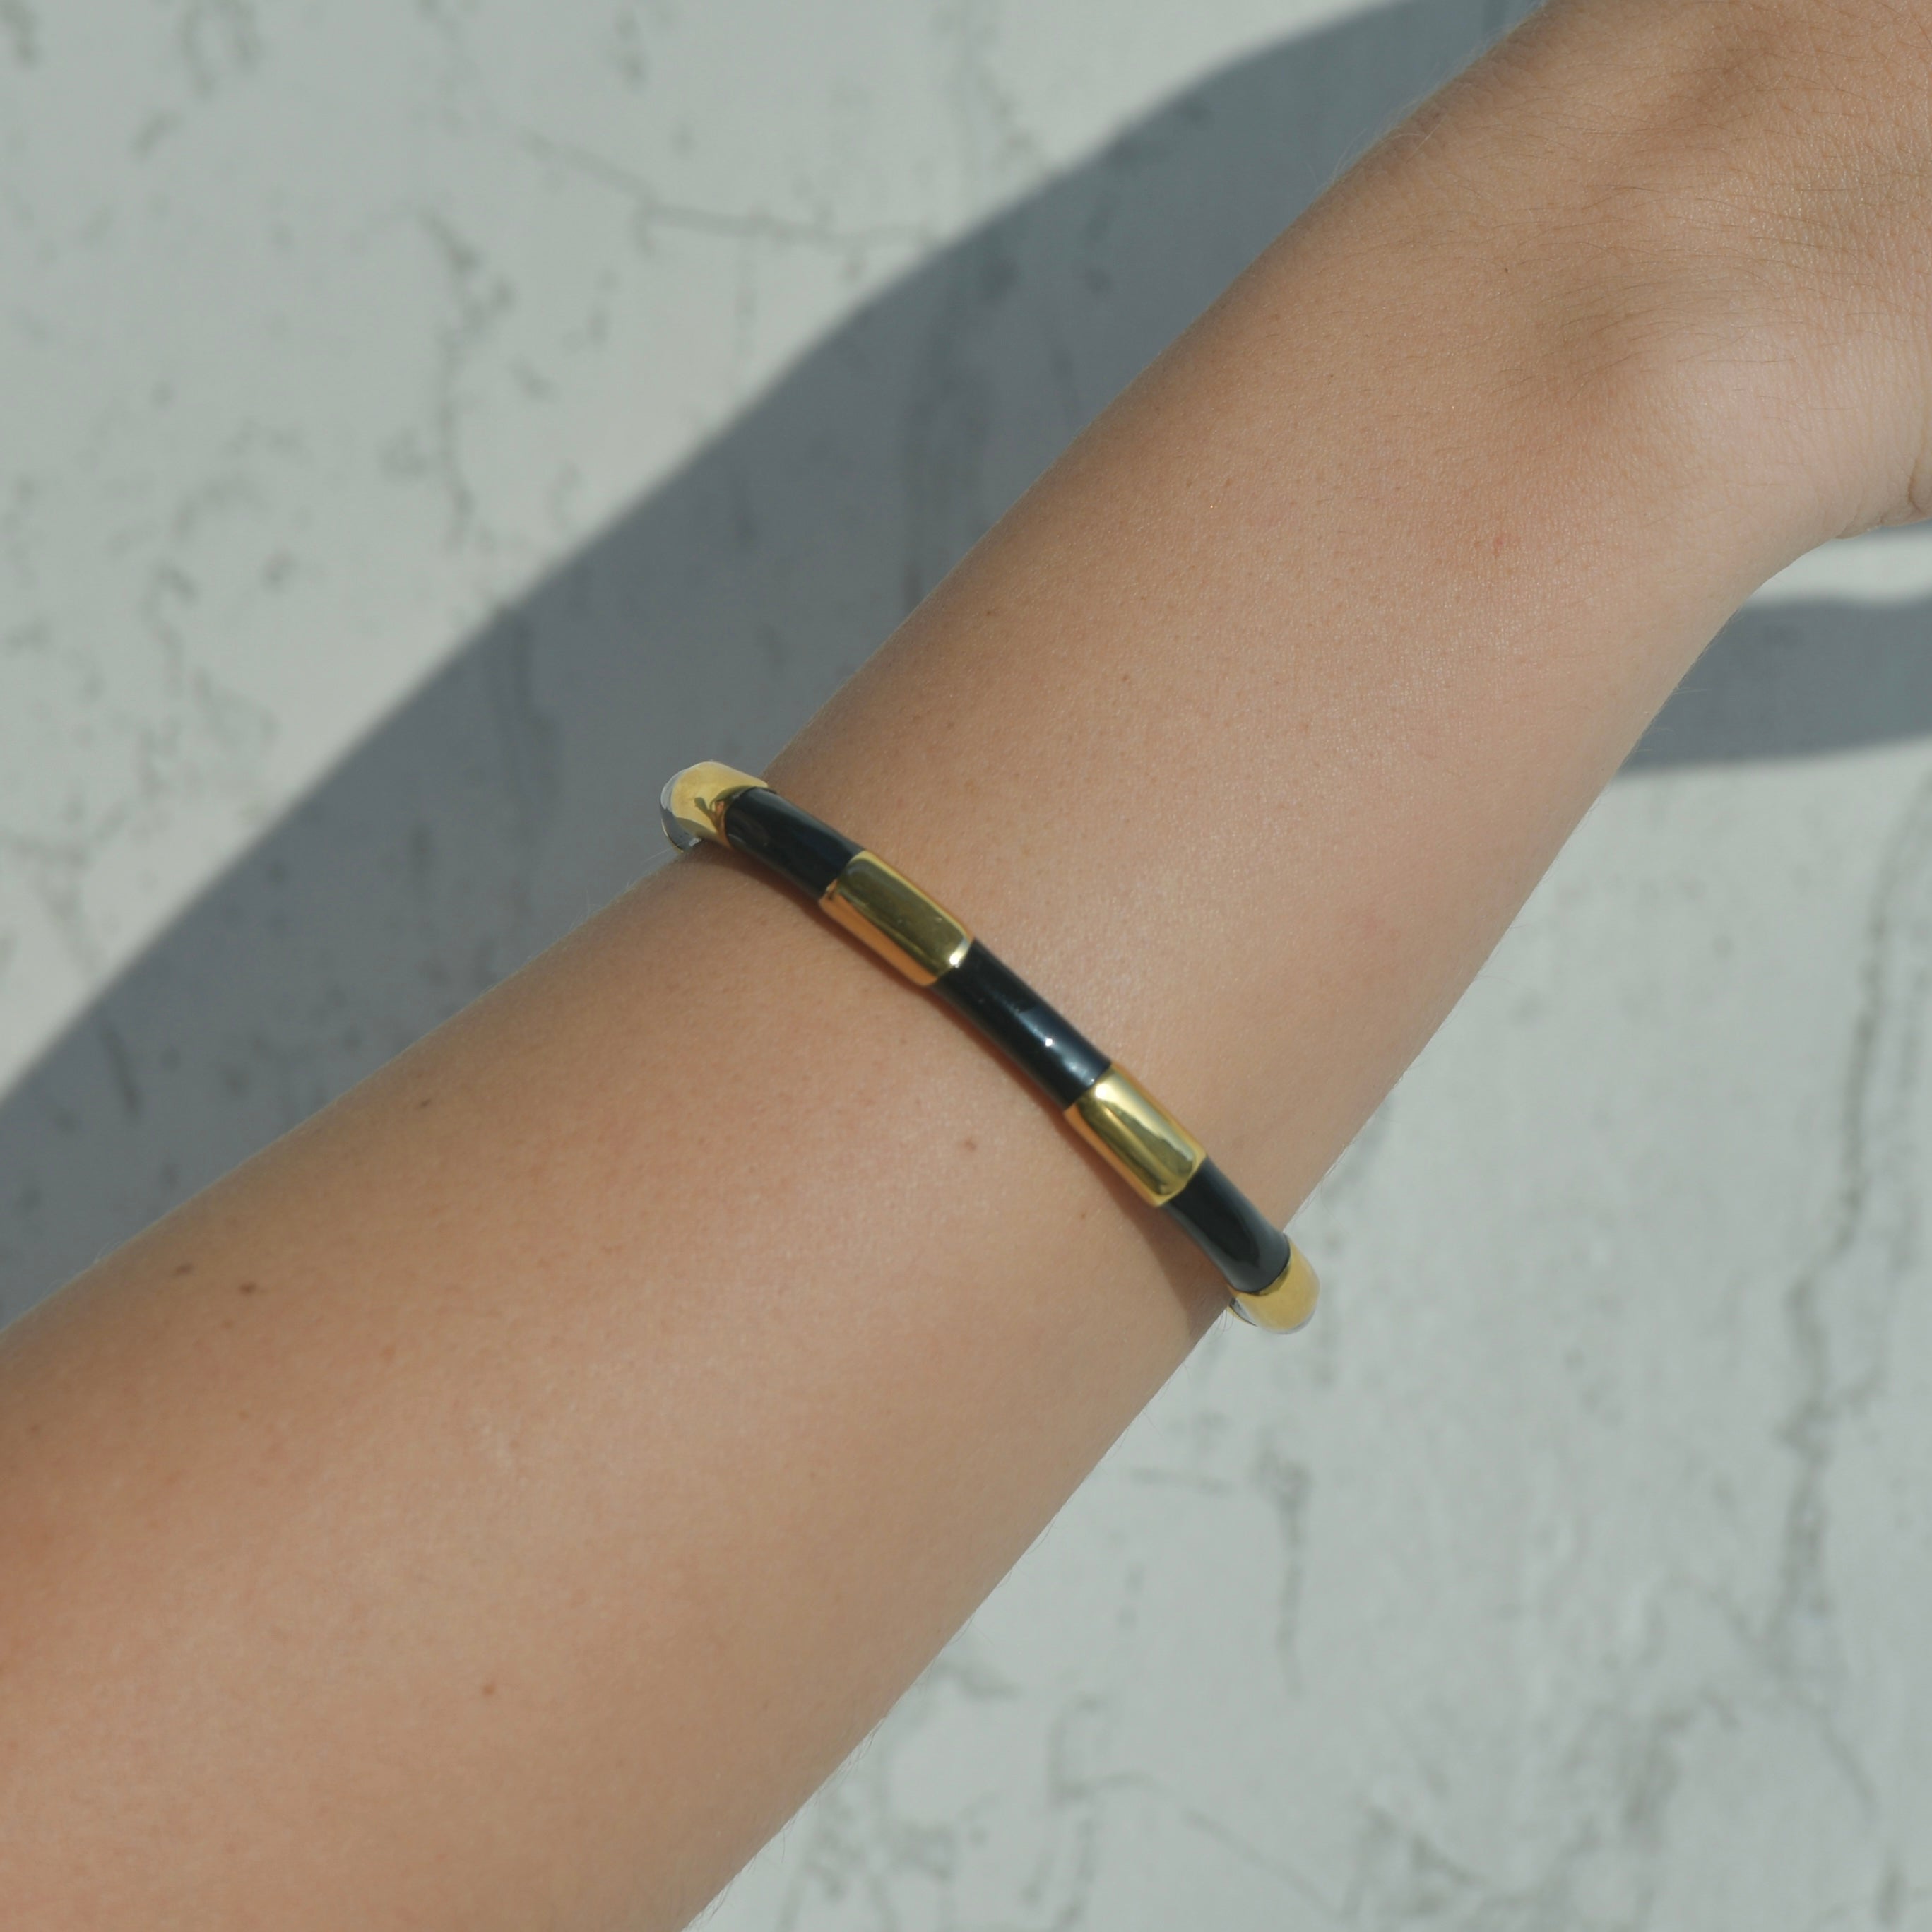 Gold Cuff bracelet. Black enamel painted creating the idea of a black ribbon around the gold cuff.